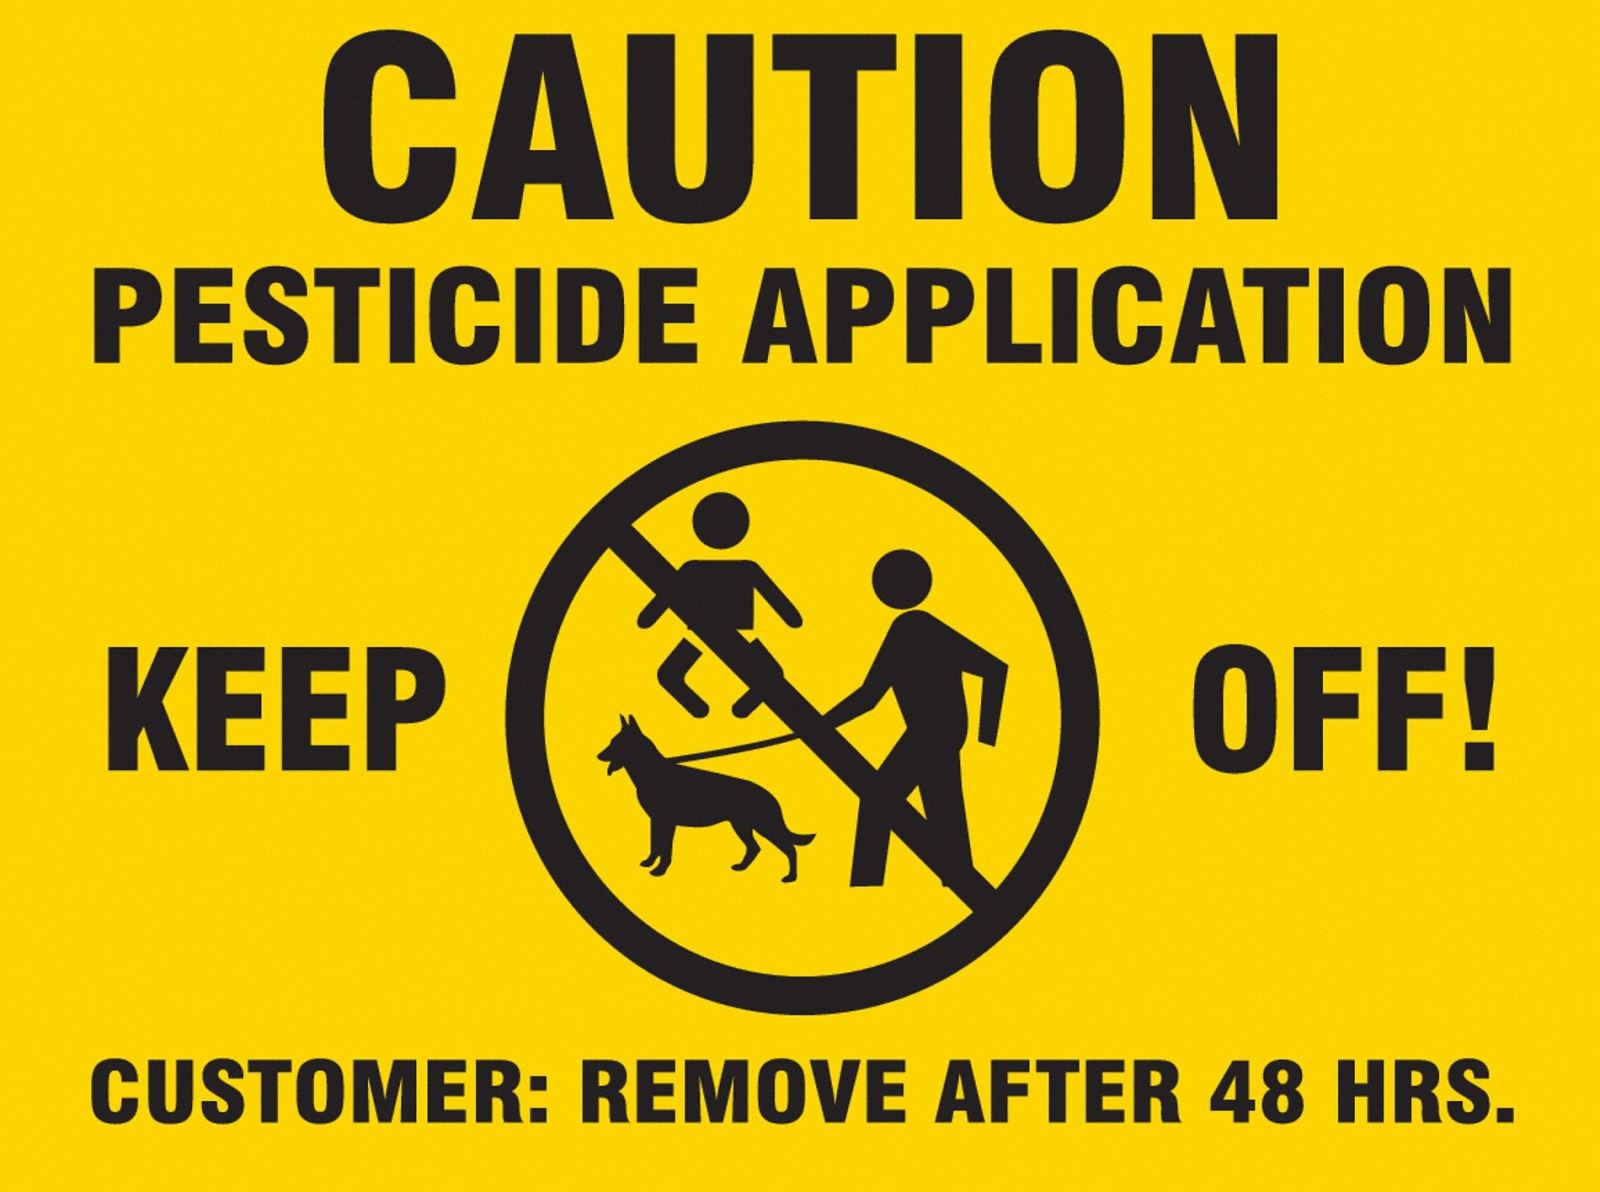 Caution - Pesticide Application - Keep off - Customer: please remove after 48 hours